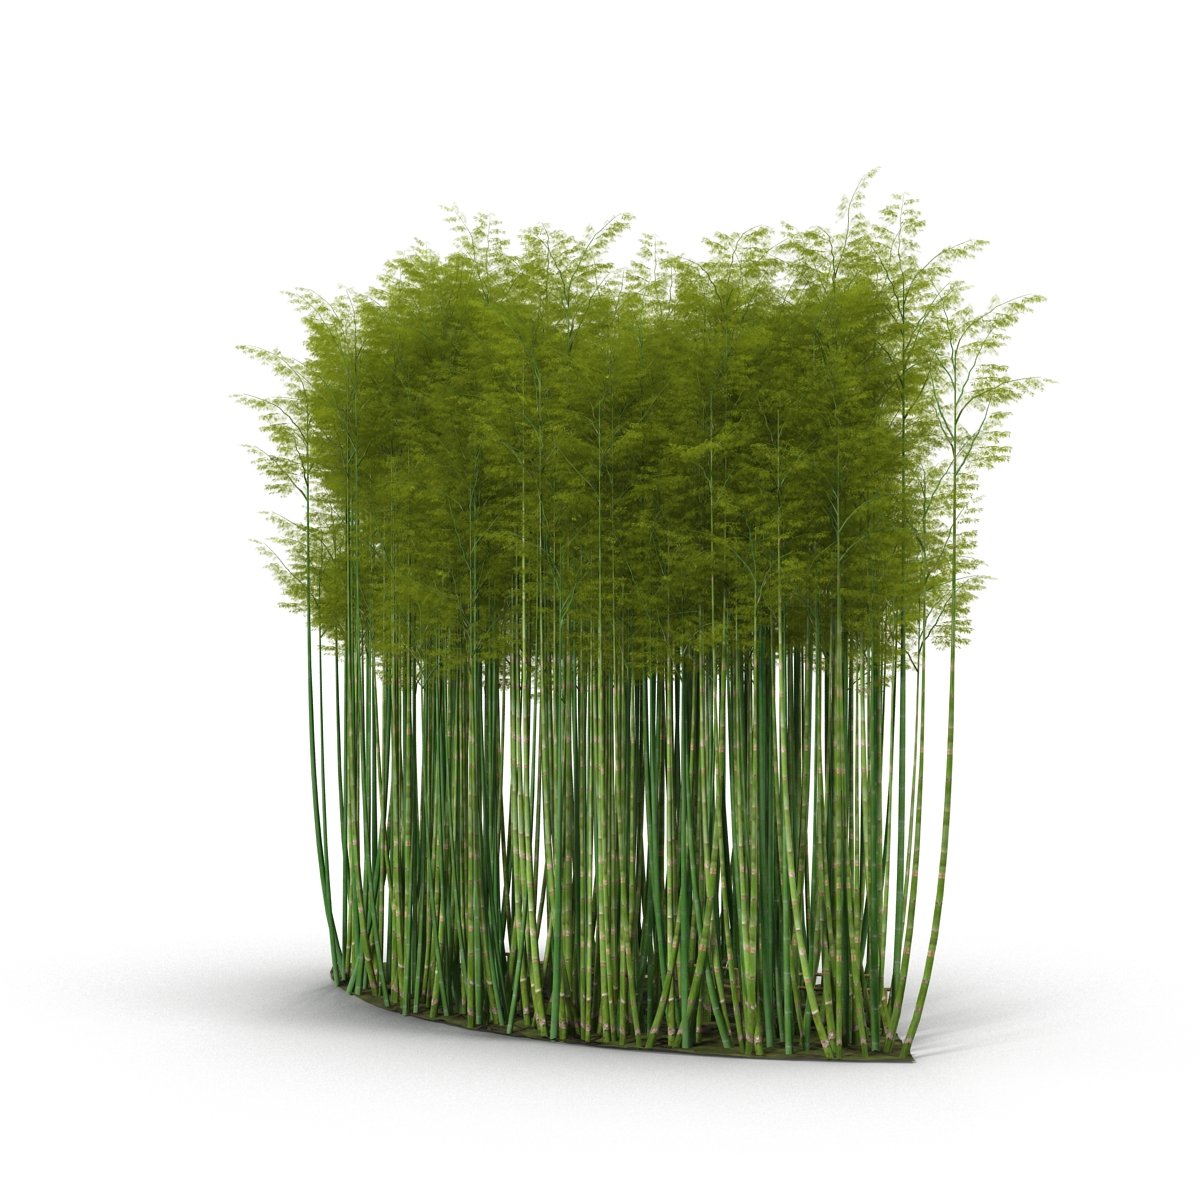 Bunch of tall green grass on a white background.